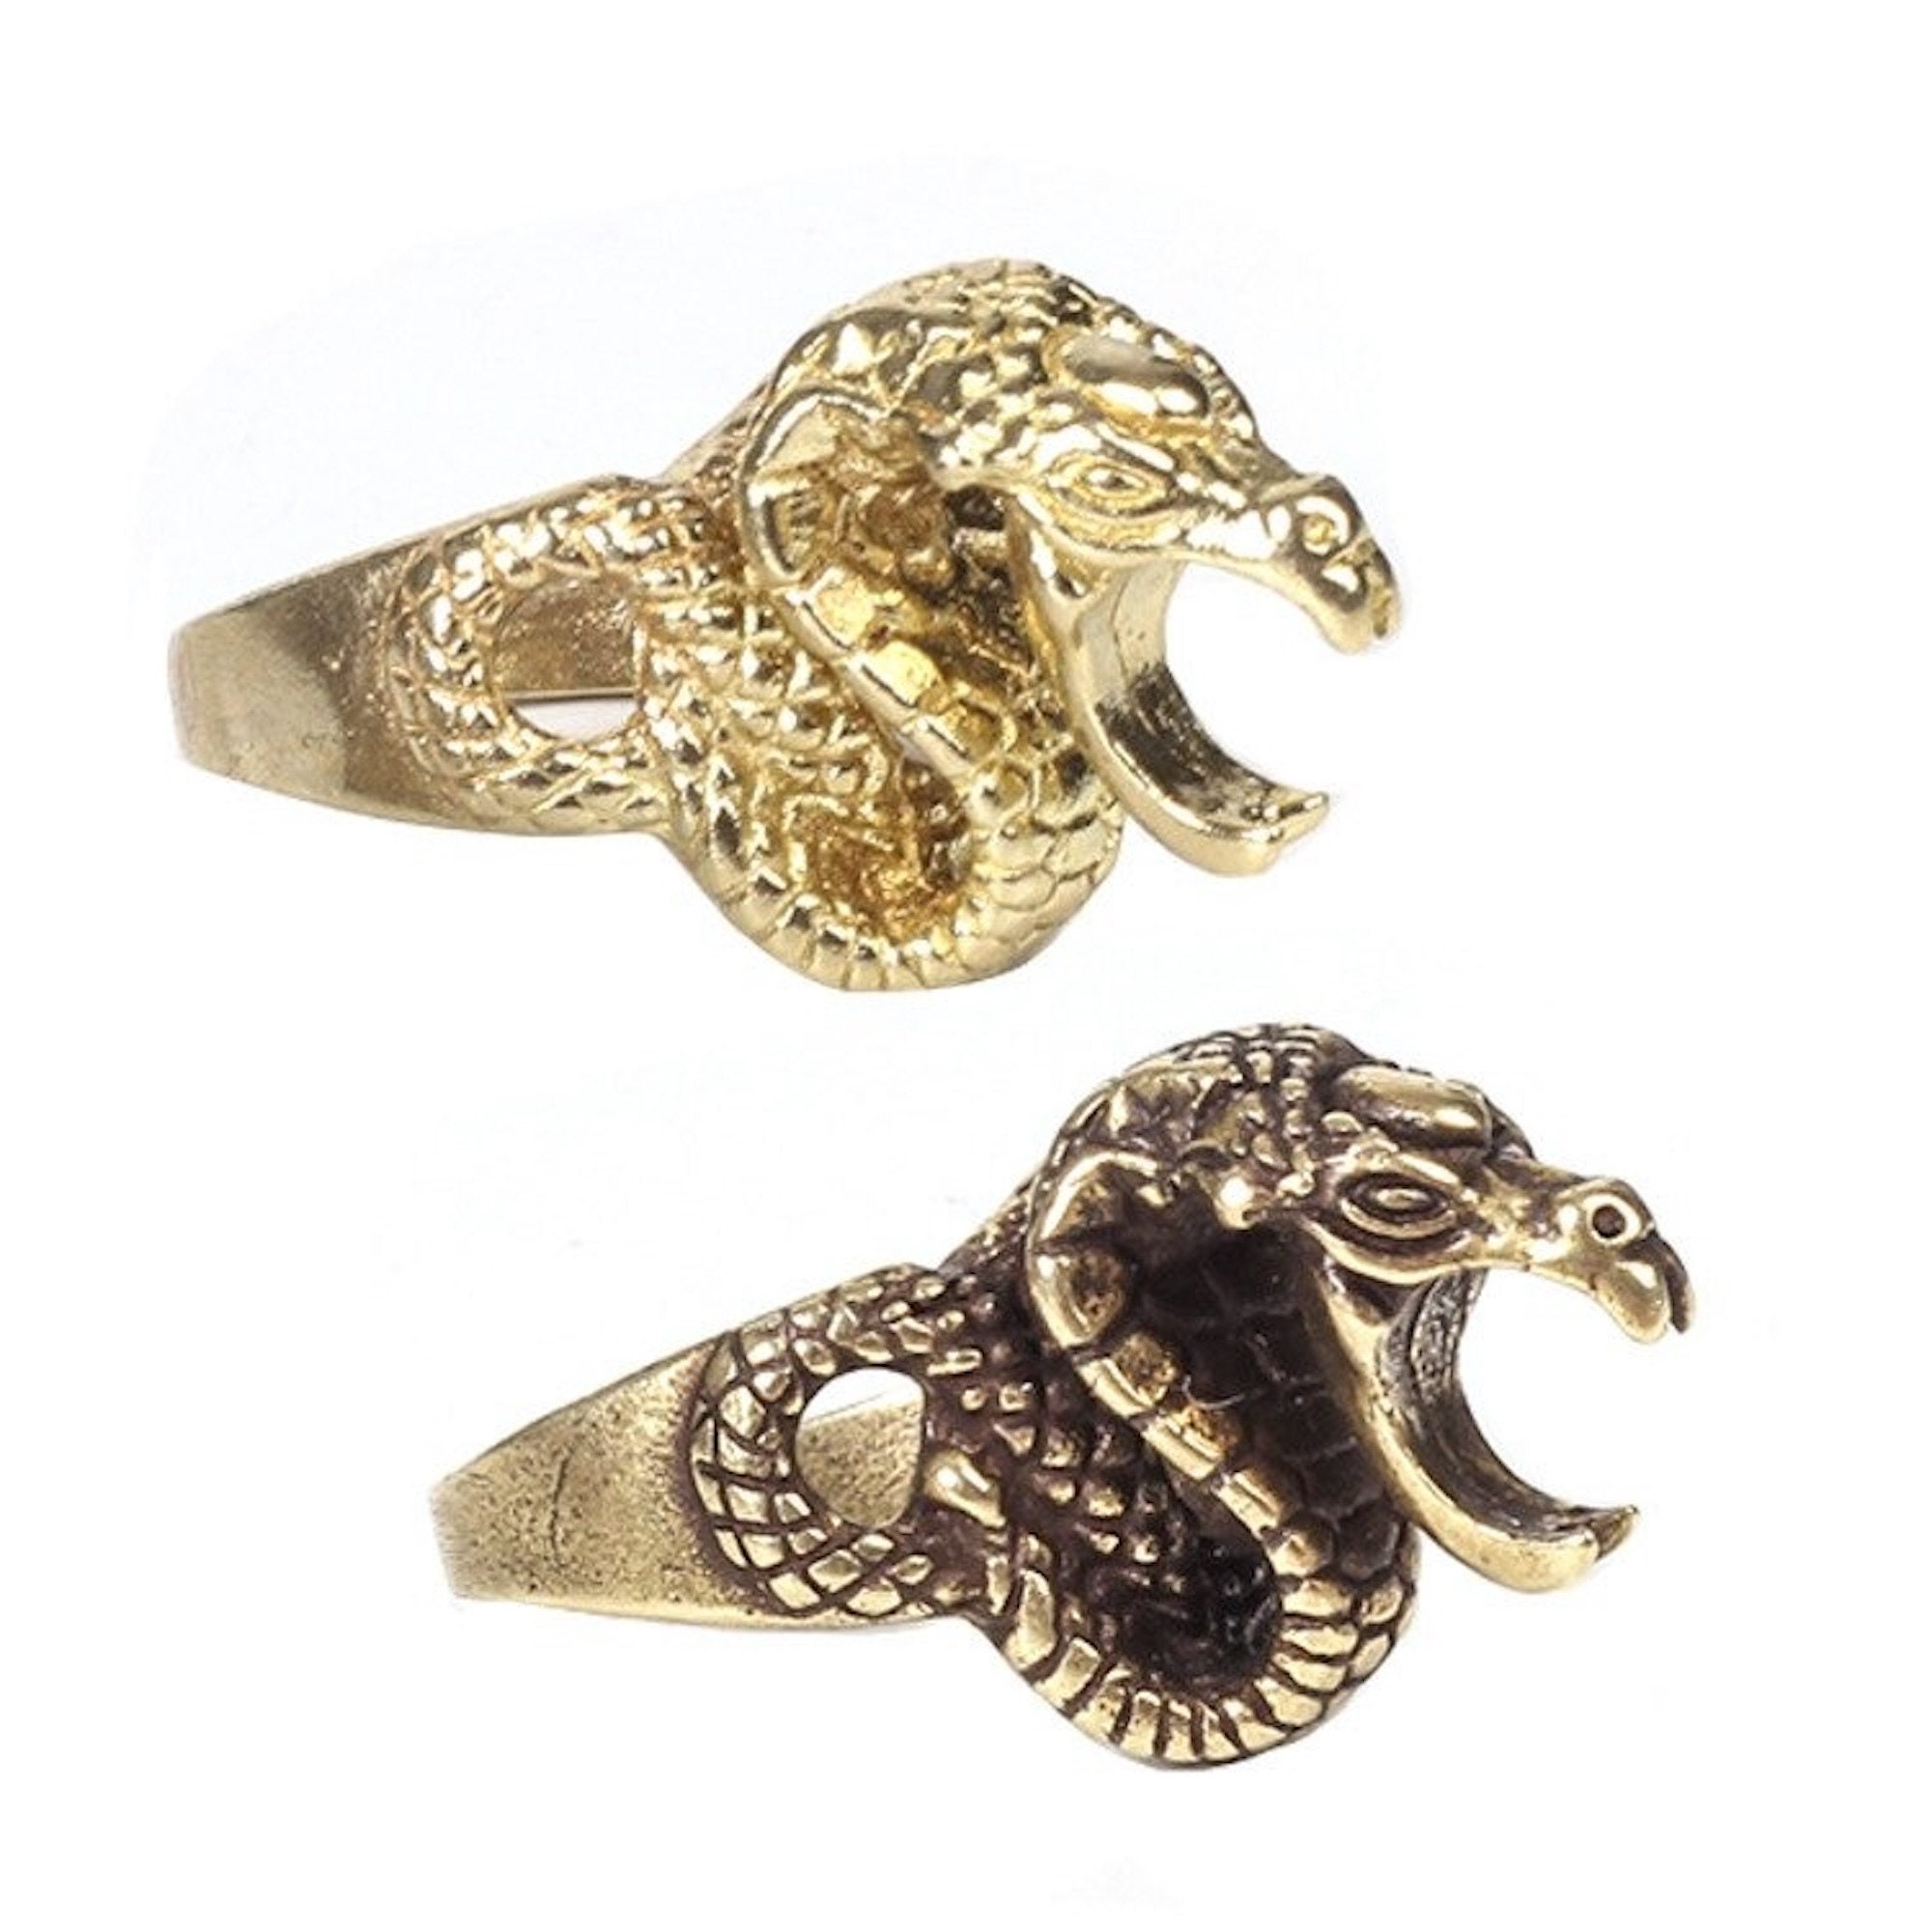 New Cool Snake-shaped Cigarette Holder Ring With Personalized